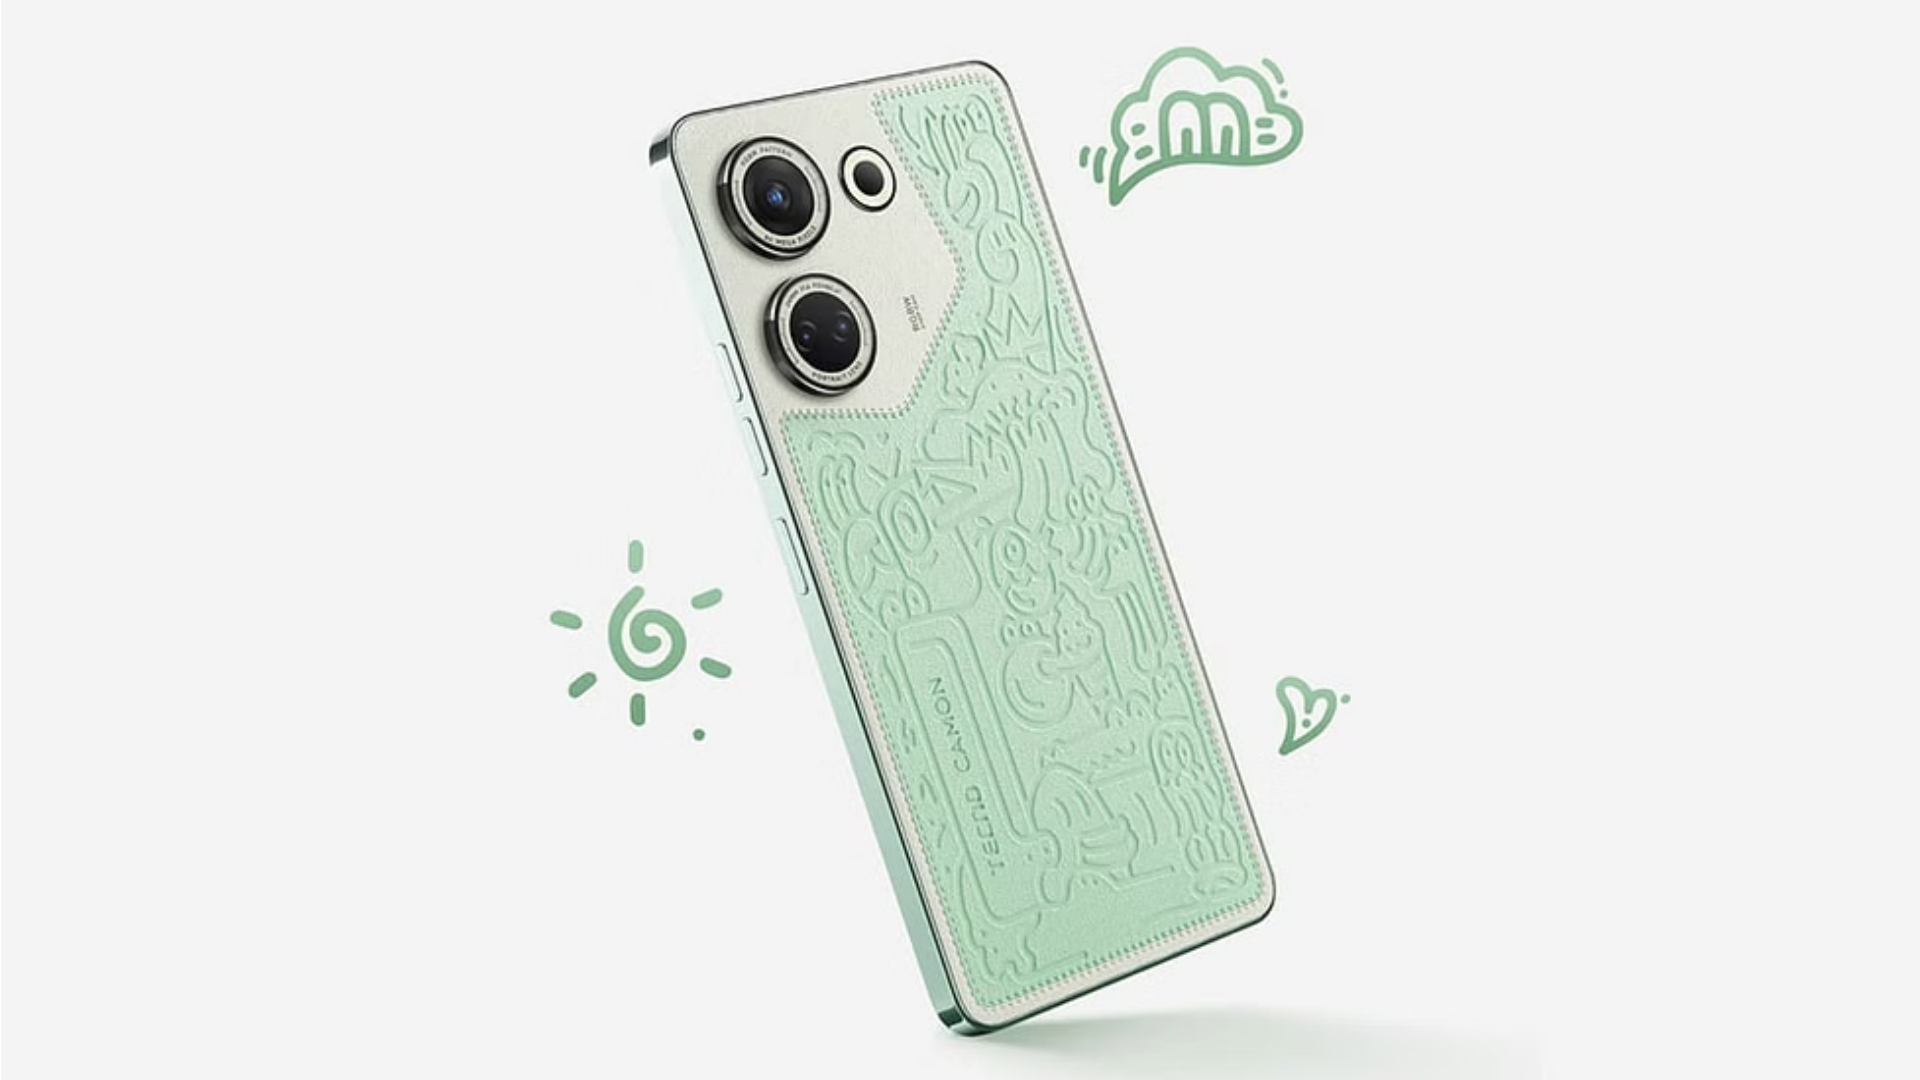 The TECHNO CAMON 20 Avocado Art Edition with green faux leather is now available.